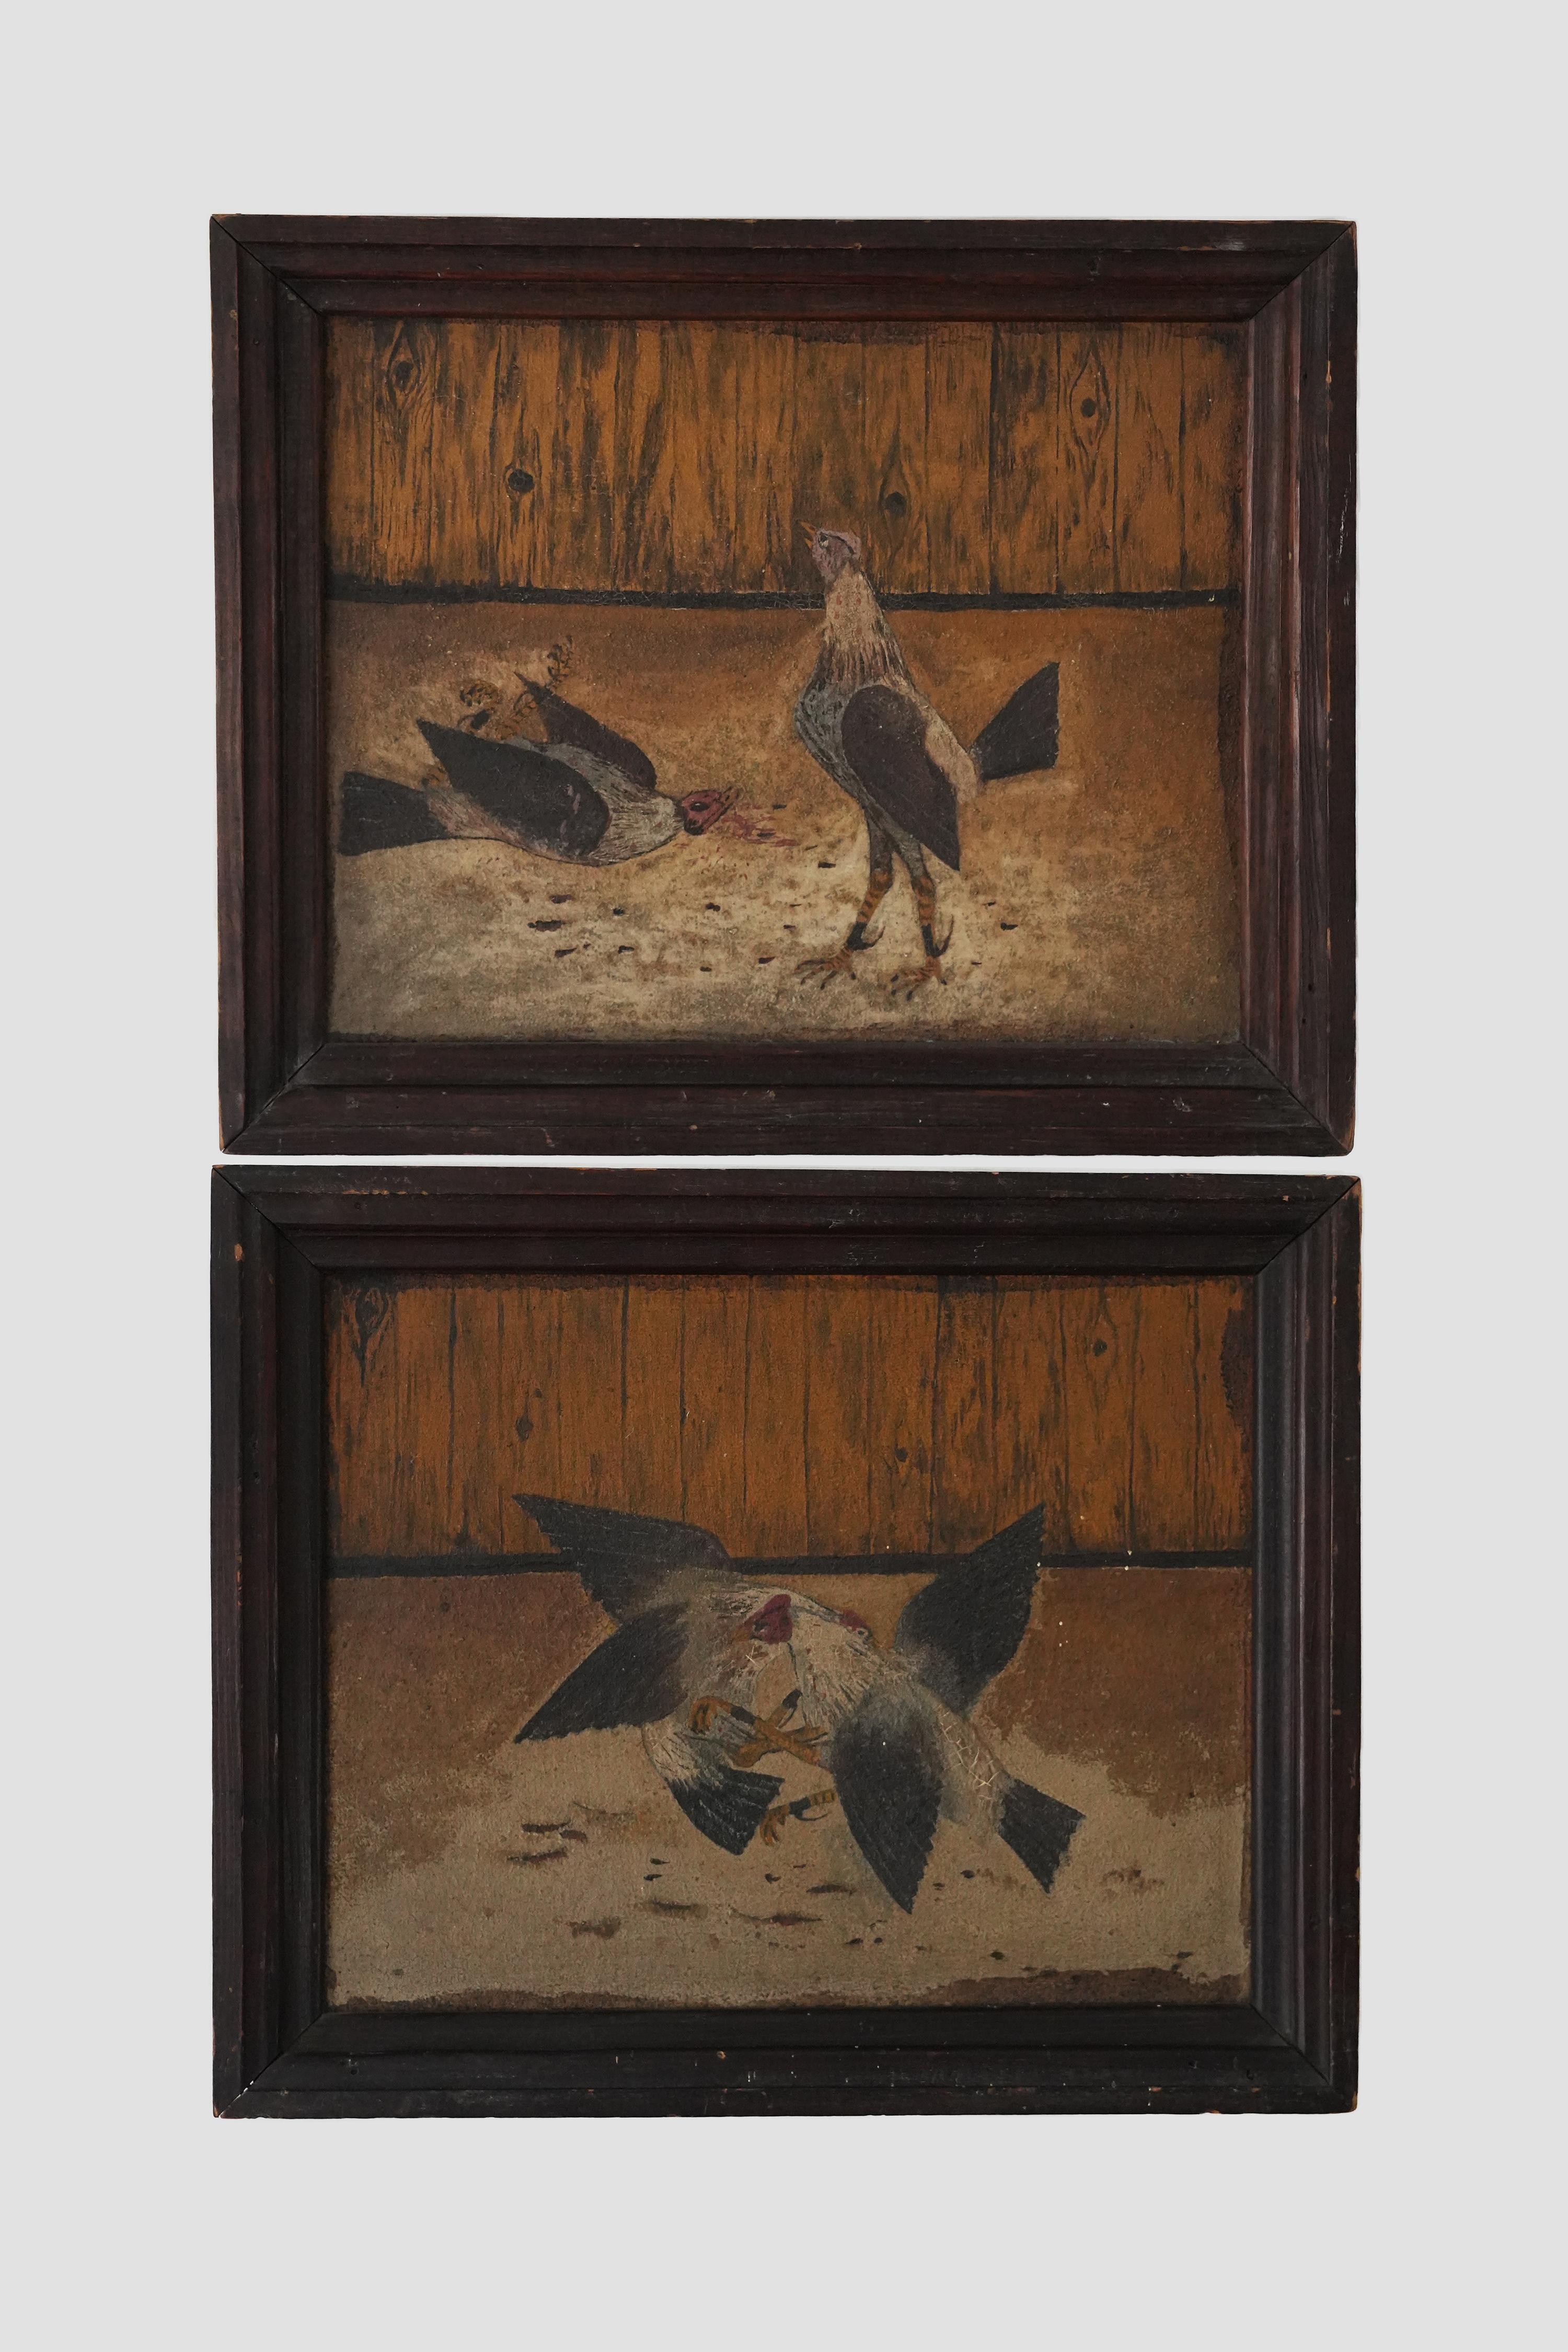 This is a fantastic pair of French cock fight paintings in their original wood frames.  One painting is depicting the two fighting cocks, while the other depicts the victorious rooster over the slain.  Wonderful scale and subject matter make these